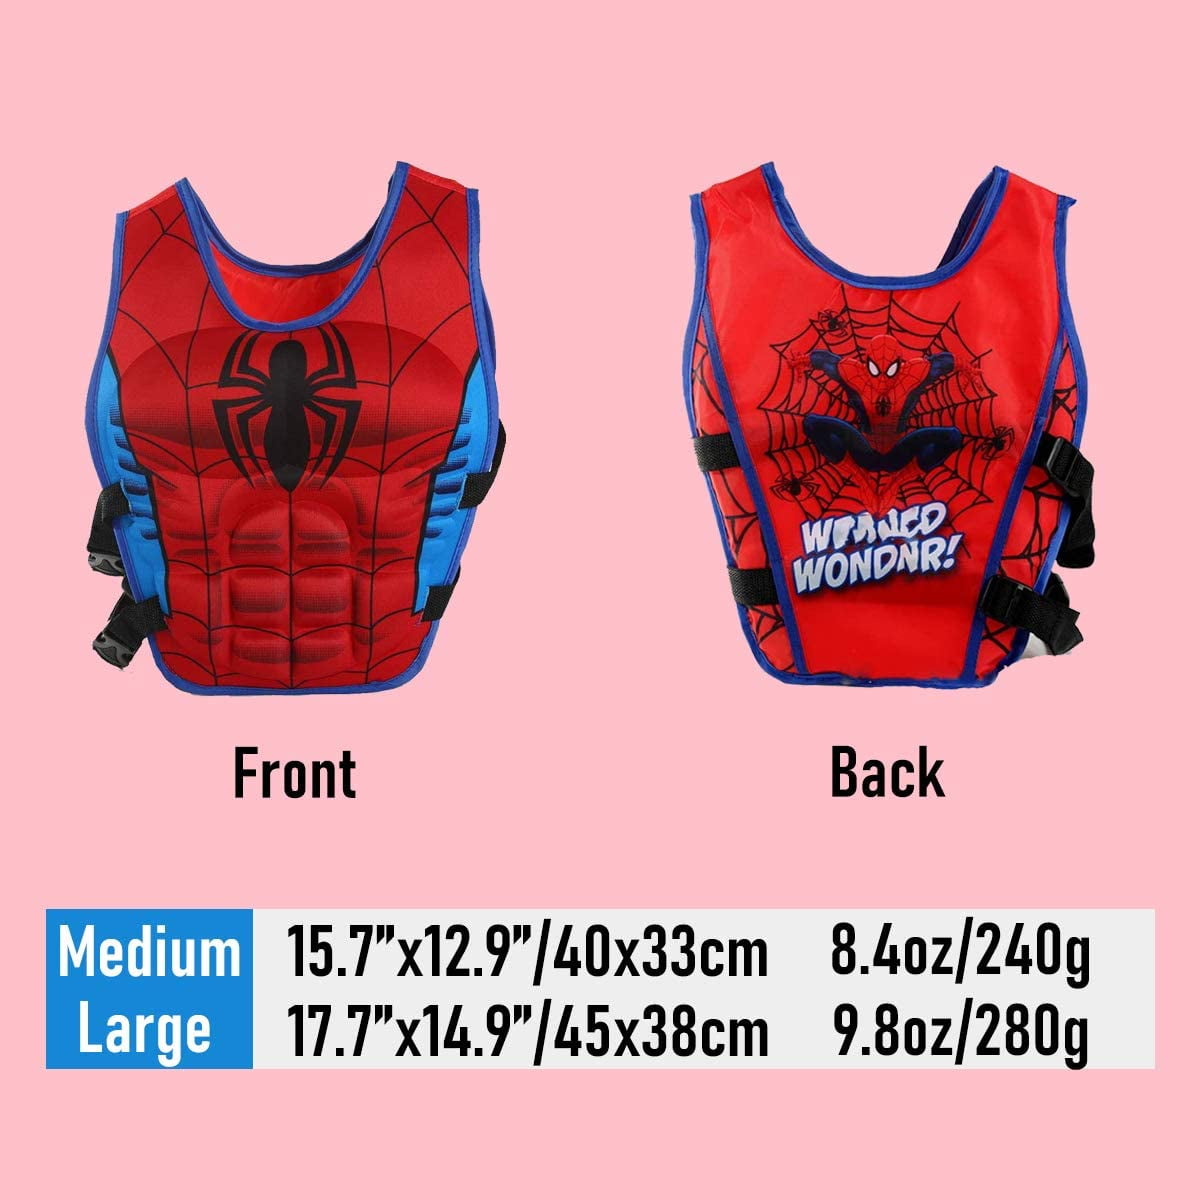 Kids Colorful Swim Jacket Vest with Adjustable Strape for Beach Holiday Outgoing Swimming Pool